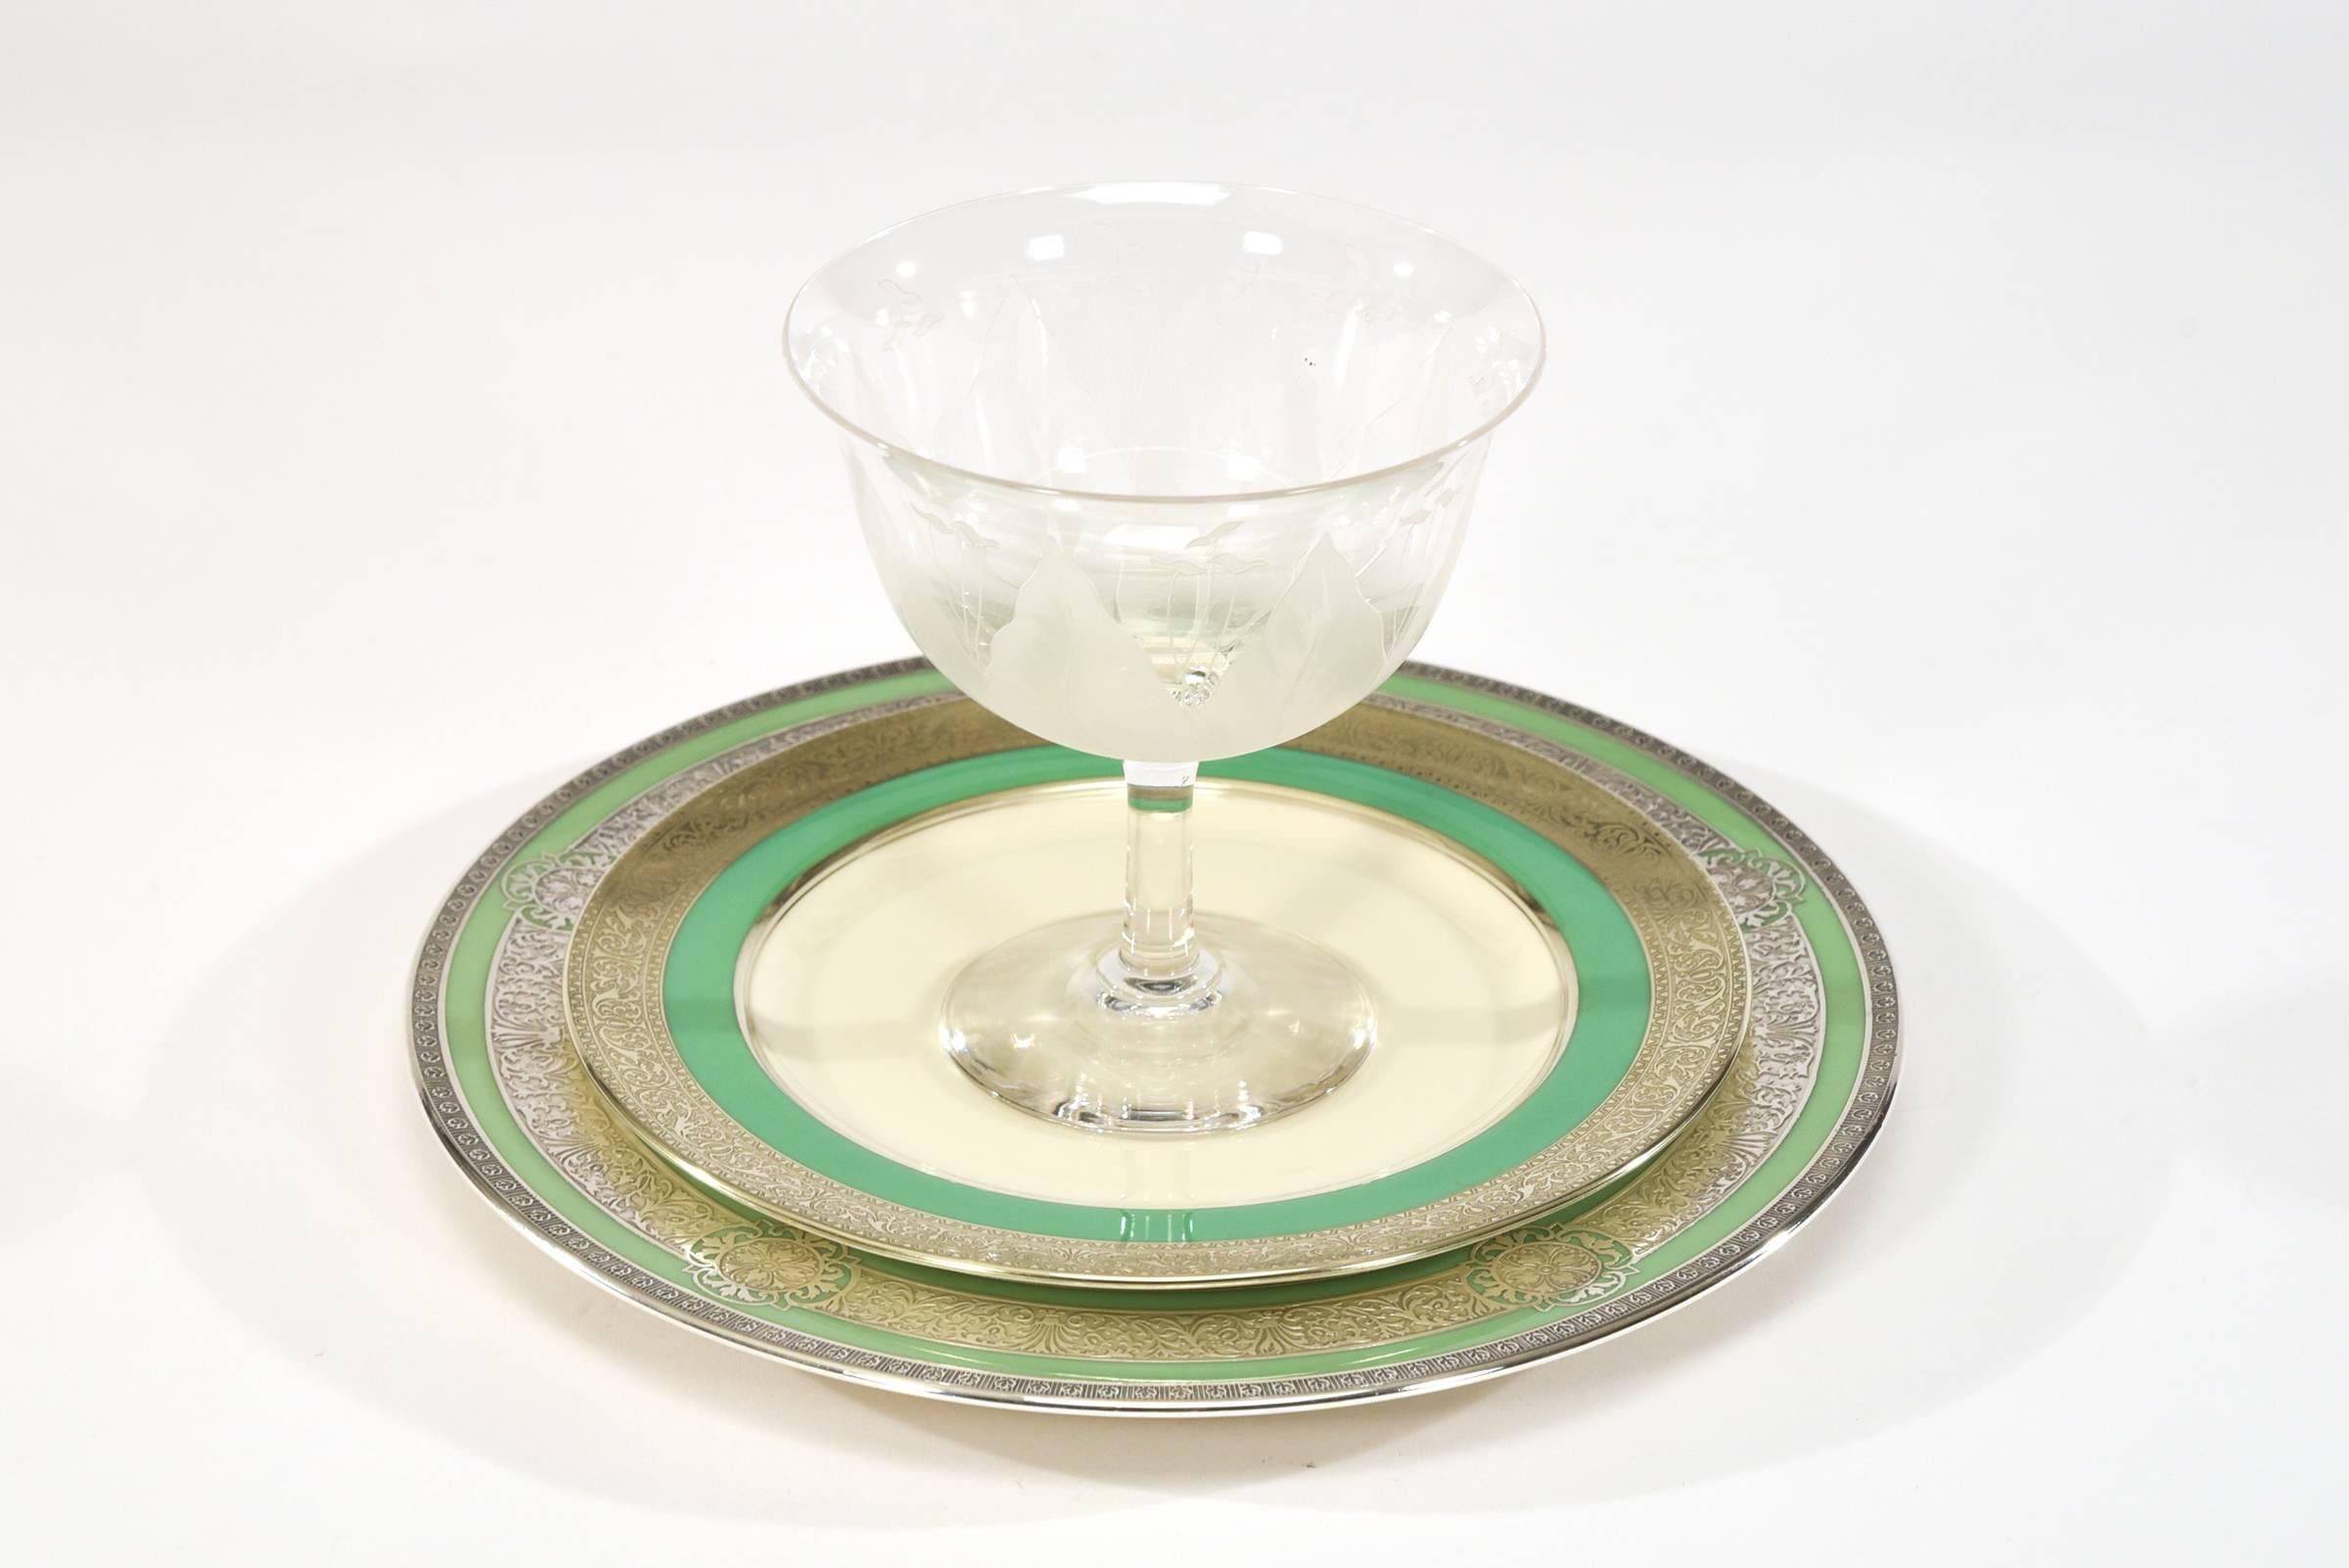 American Set of 12 Lenox Green & Ivory Dessert Plates with Silver Overlay Borders, 1920s